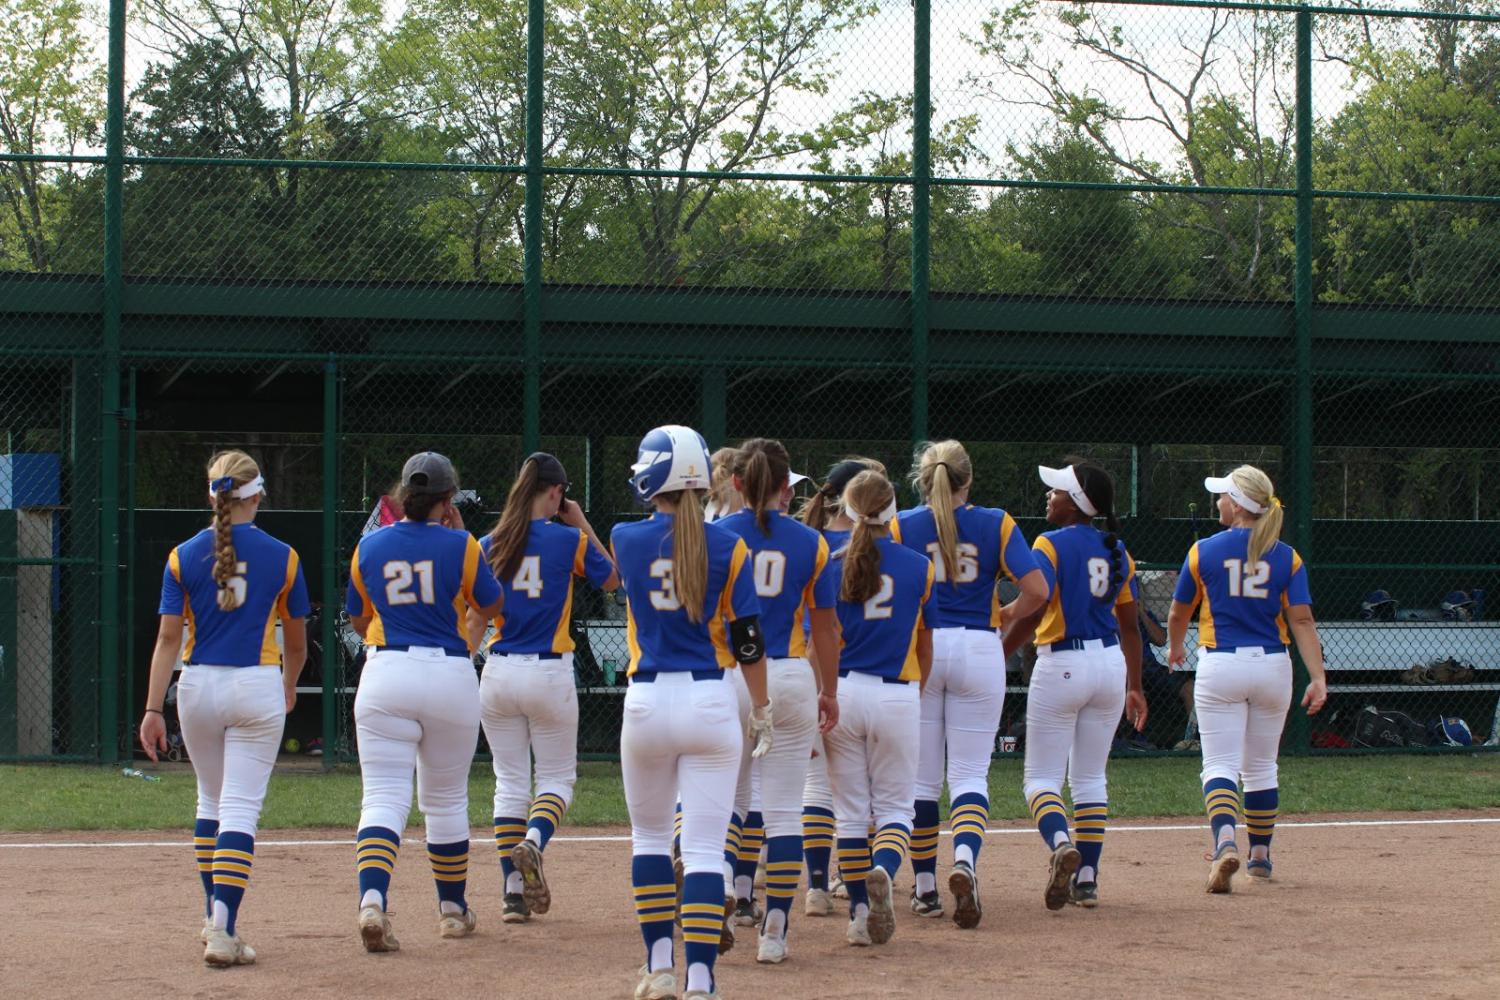 After defeating Sullivan 3-0 in the first game, varsity teammates walk off the field together. Senior Whitney Boschert contributed to the win pitching two out of three innings. 